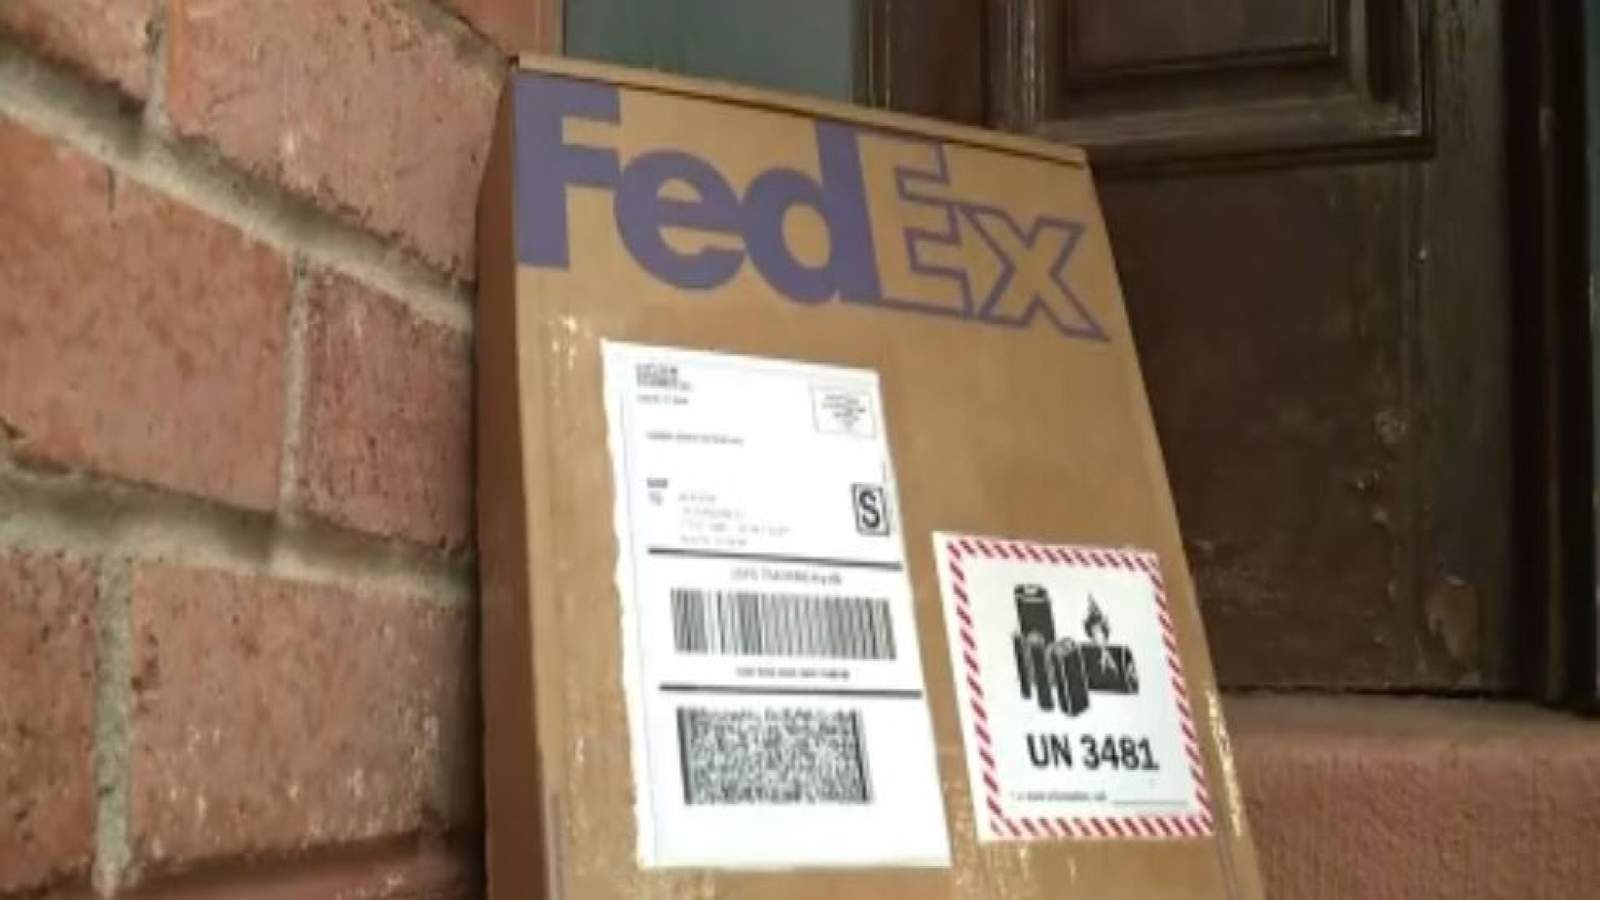 Harris County launches initiative targeting those who steal people’s packages from their porch